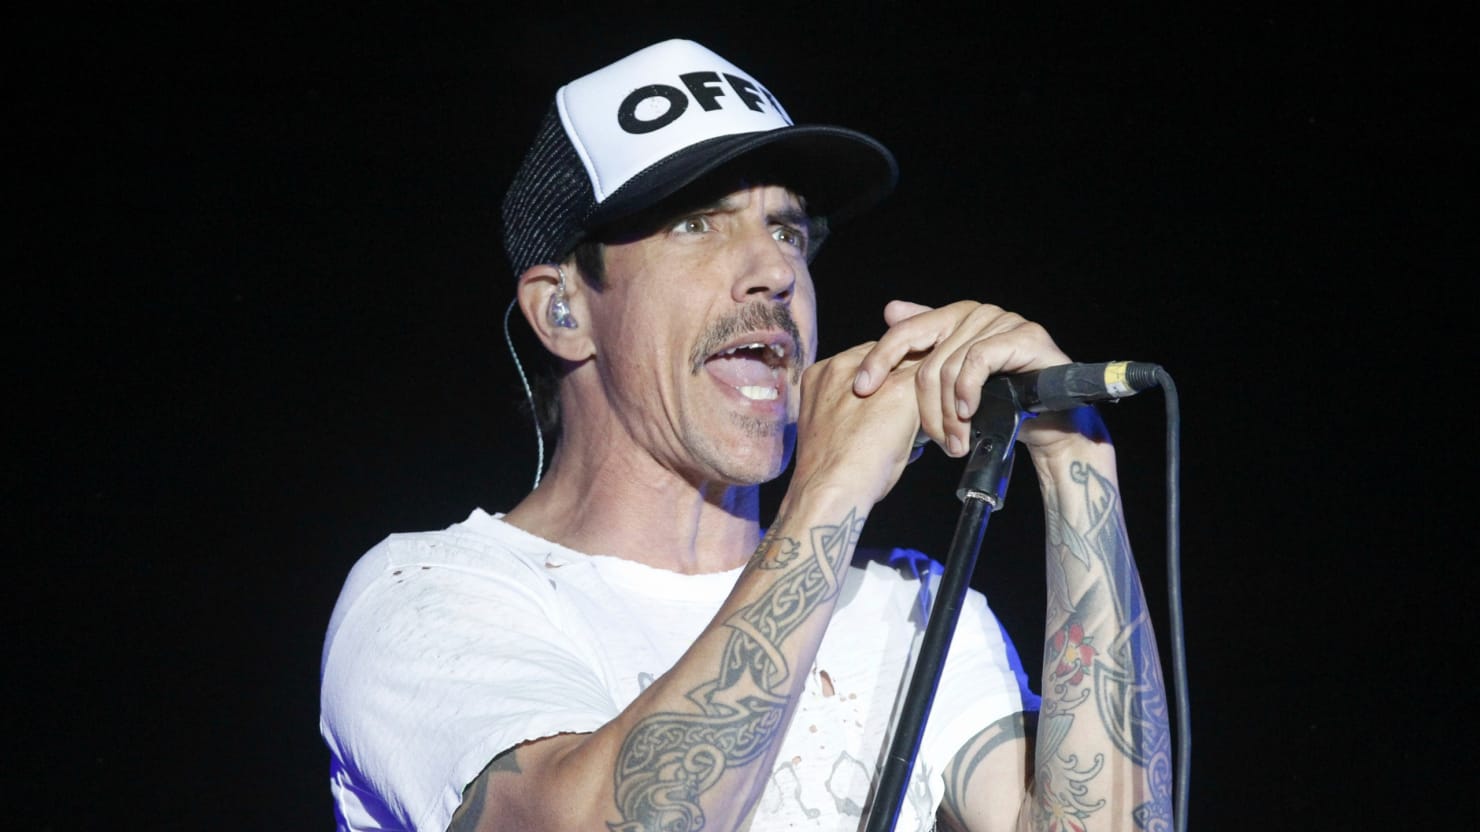 Chili Peppers Singer Hospitalized